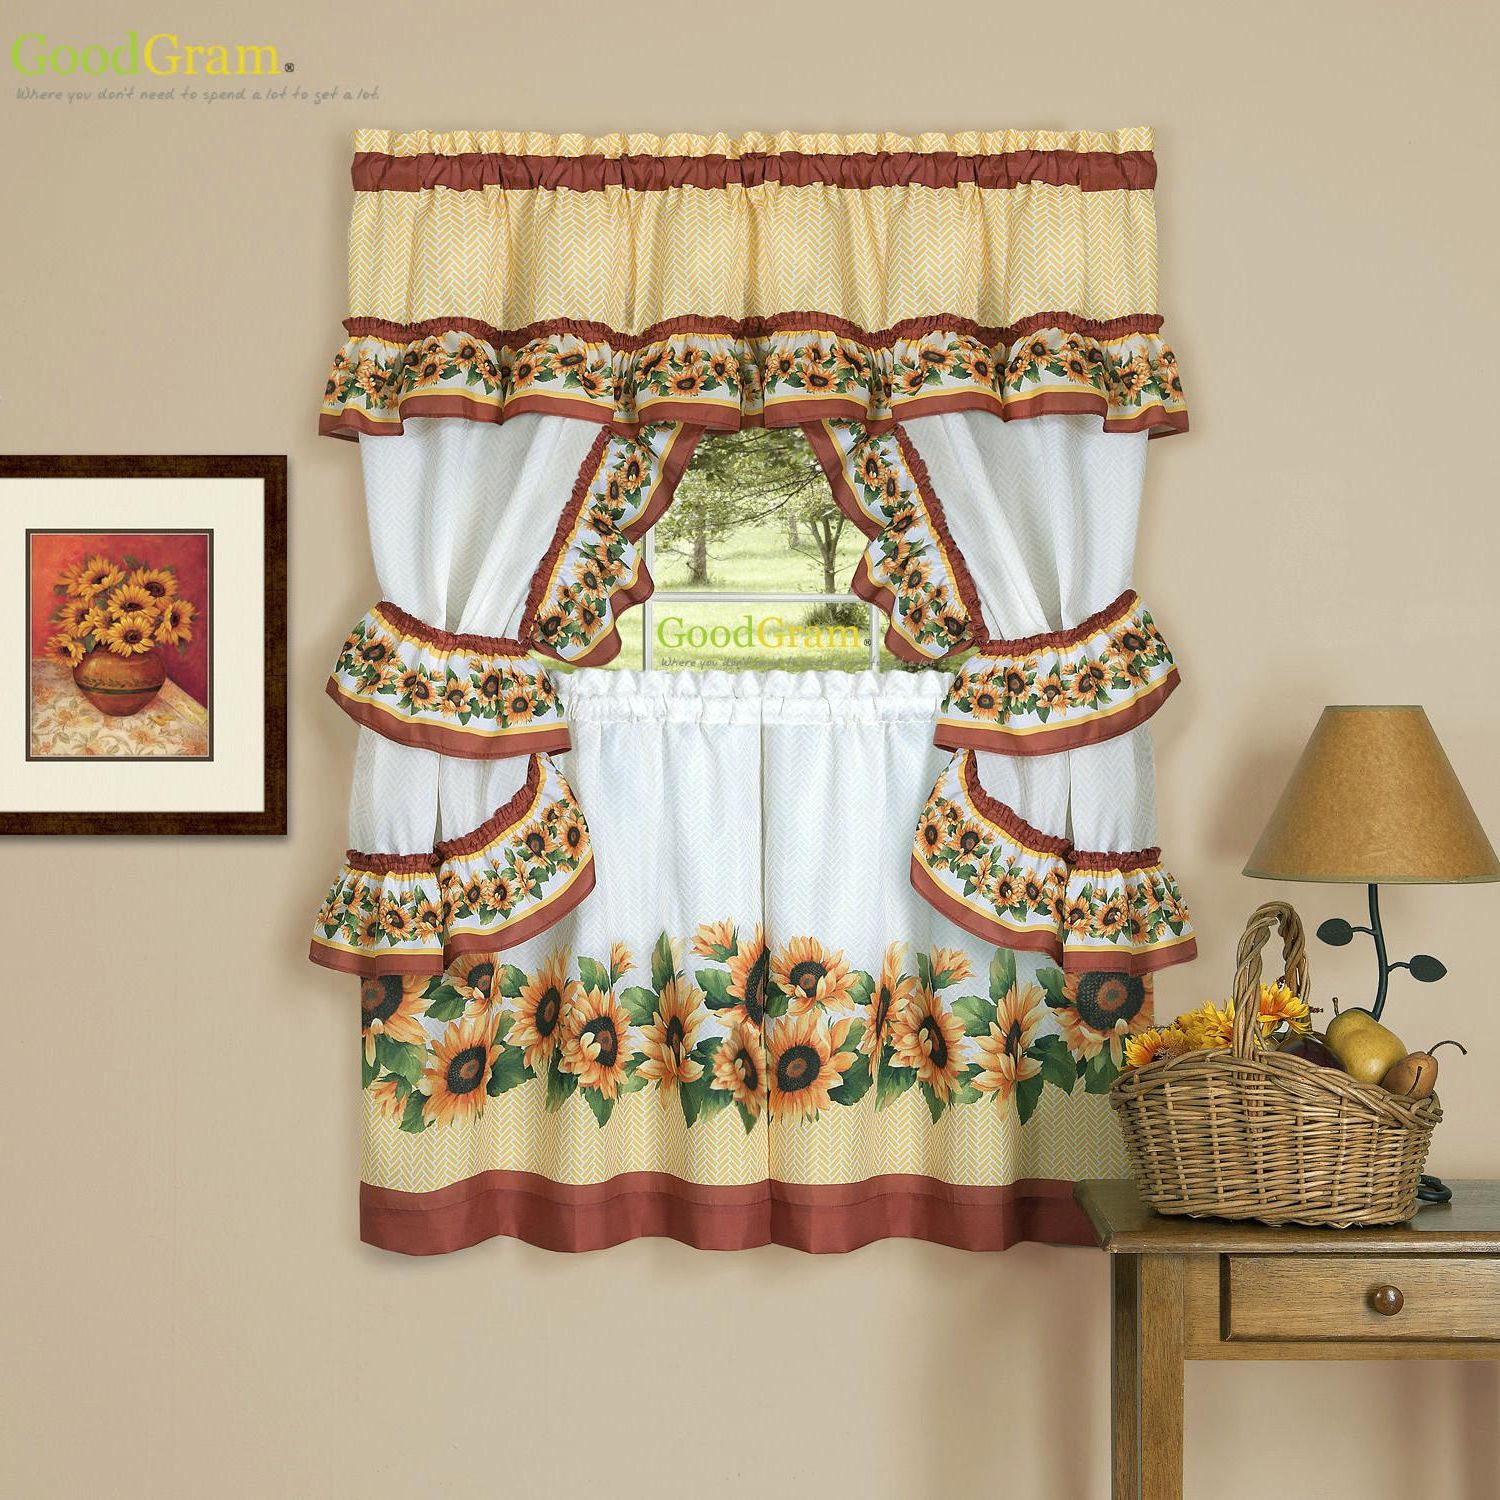 Chevron Sunflower Complete Cottage Kitchen Curtain Set Pertaining To Latest Lemon Drop Tier And Valance Window Curtain Sets (View 19 of 20)